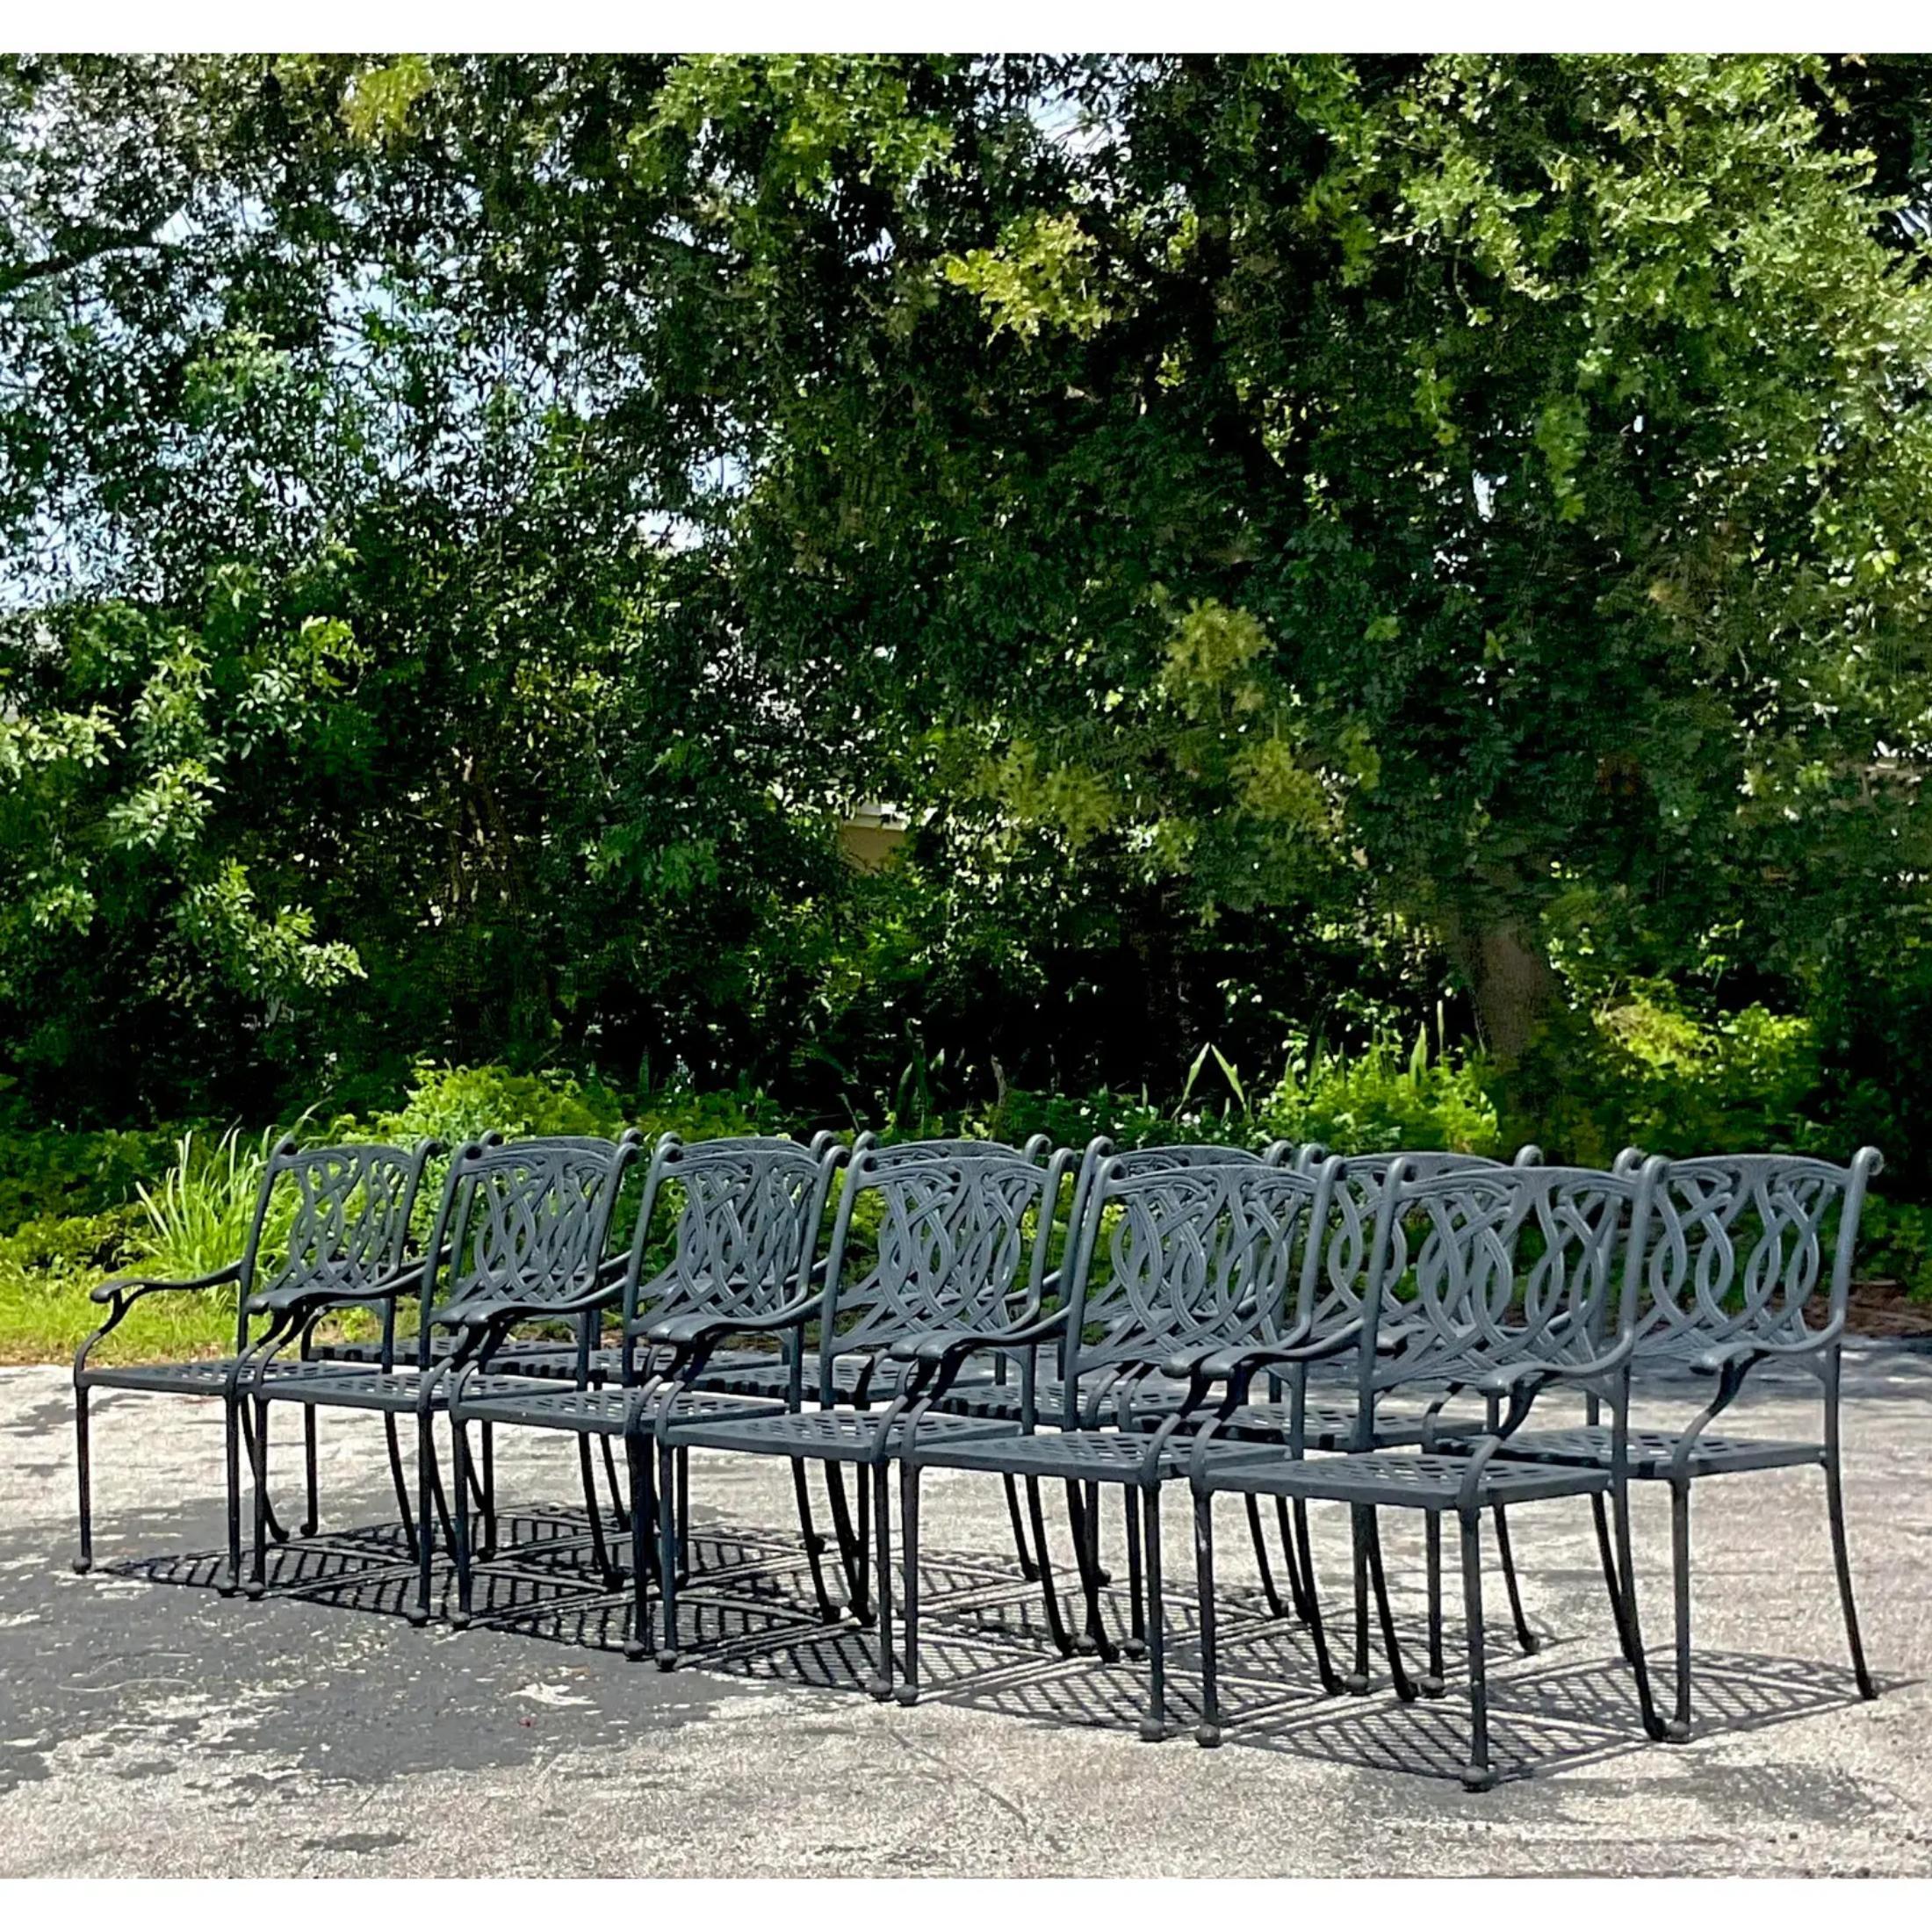 A fabulous set of 12 vintage Coastal outdoor dining chairs. Made in a durable cast aluminum. A much better material if your project is close to any ocean. Lighter weight and easy to move, yet super durable. Currently a matte black, but easily